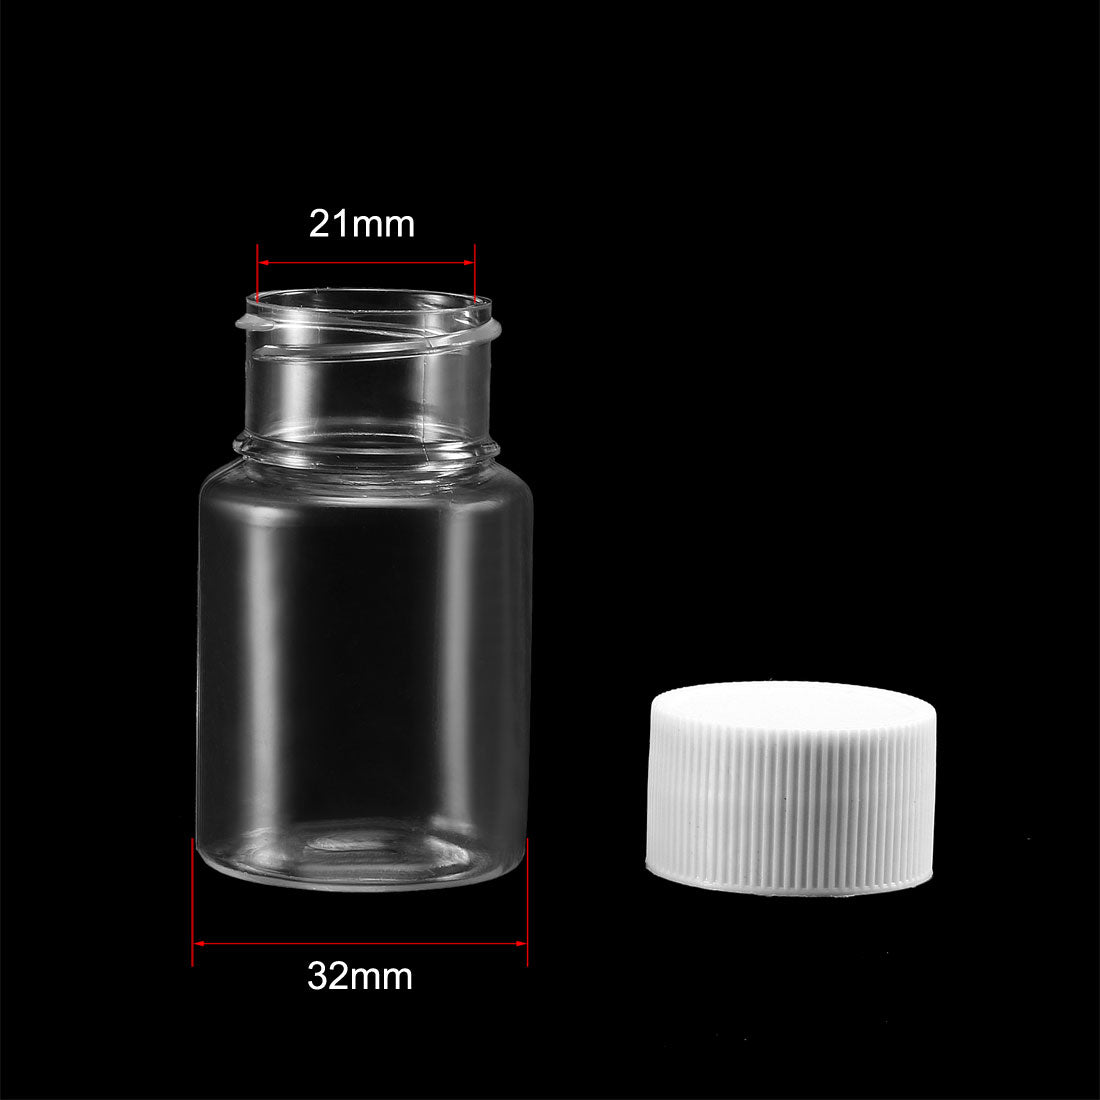 uxcell Uxcell Plastic Lab Chemical Reagent Bottle 30ml/1oz Wide Mouth Sample Sealing Liquid Storage Container 30pcs